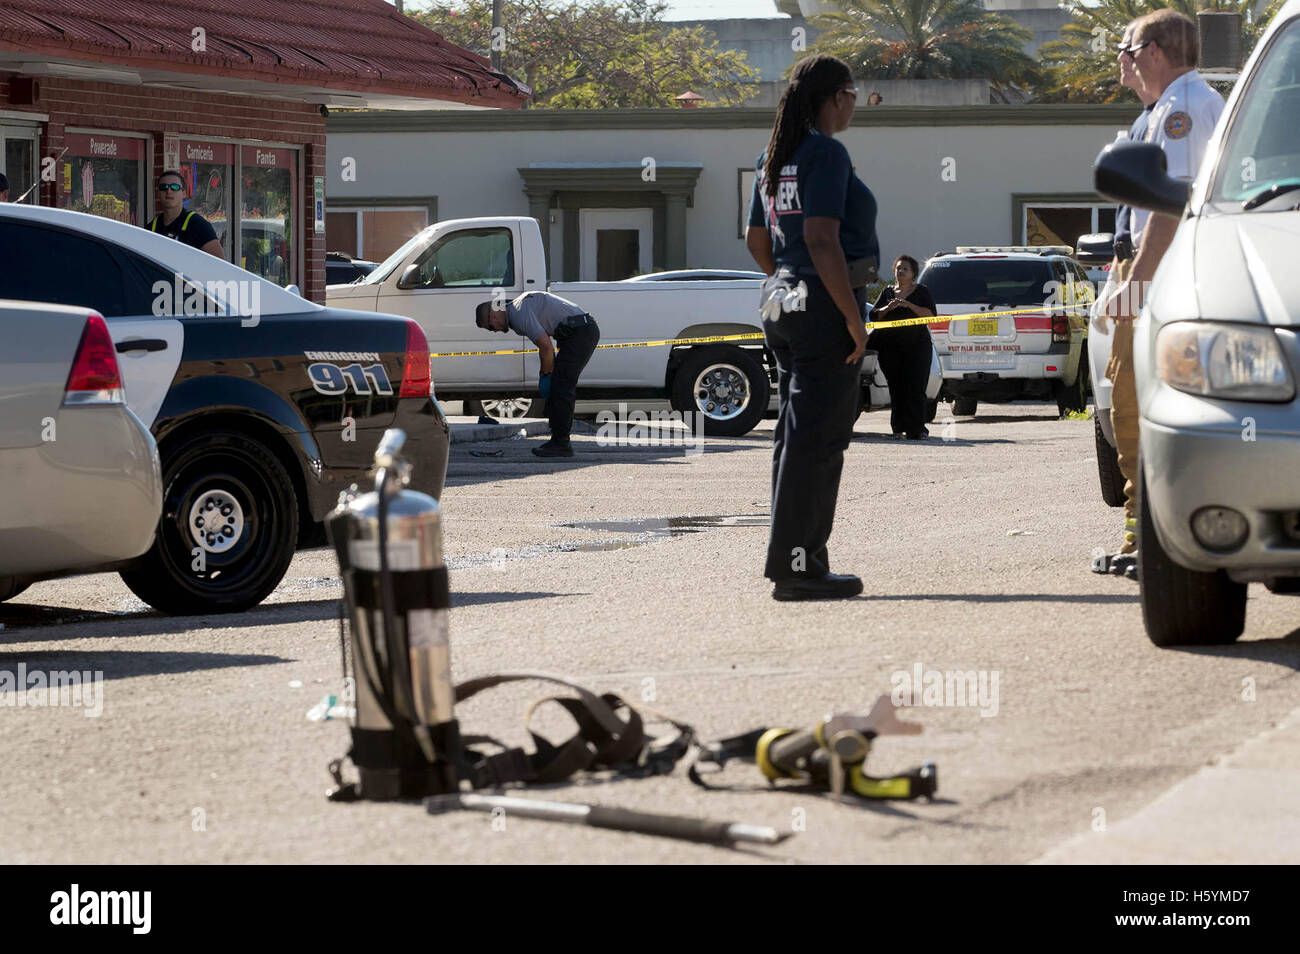 West Palm Beach, Florida, USA. 22nd Oct, 2016. Investigators examine evidence at a strip mall at 932 Belvedere Road. One person died and another was severely burned Saturday afternoon after an explosion at St. Anne & Vierge Miracle Botanica in West Palm Beach, Florida on October 22, 2016. © Allen Eyestone/The Palm Beach Post/ZUMA Wire/Alamy Live News Stock Photo